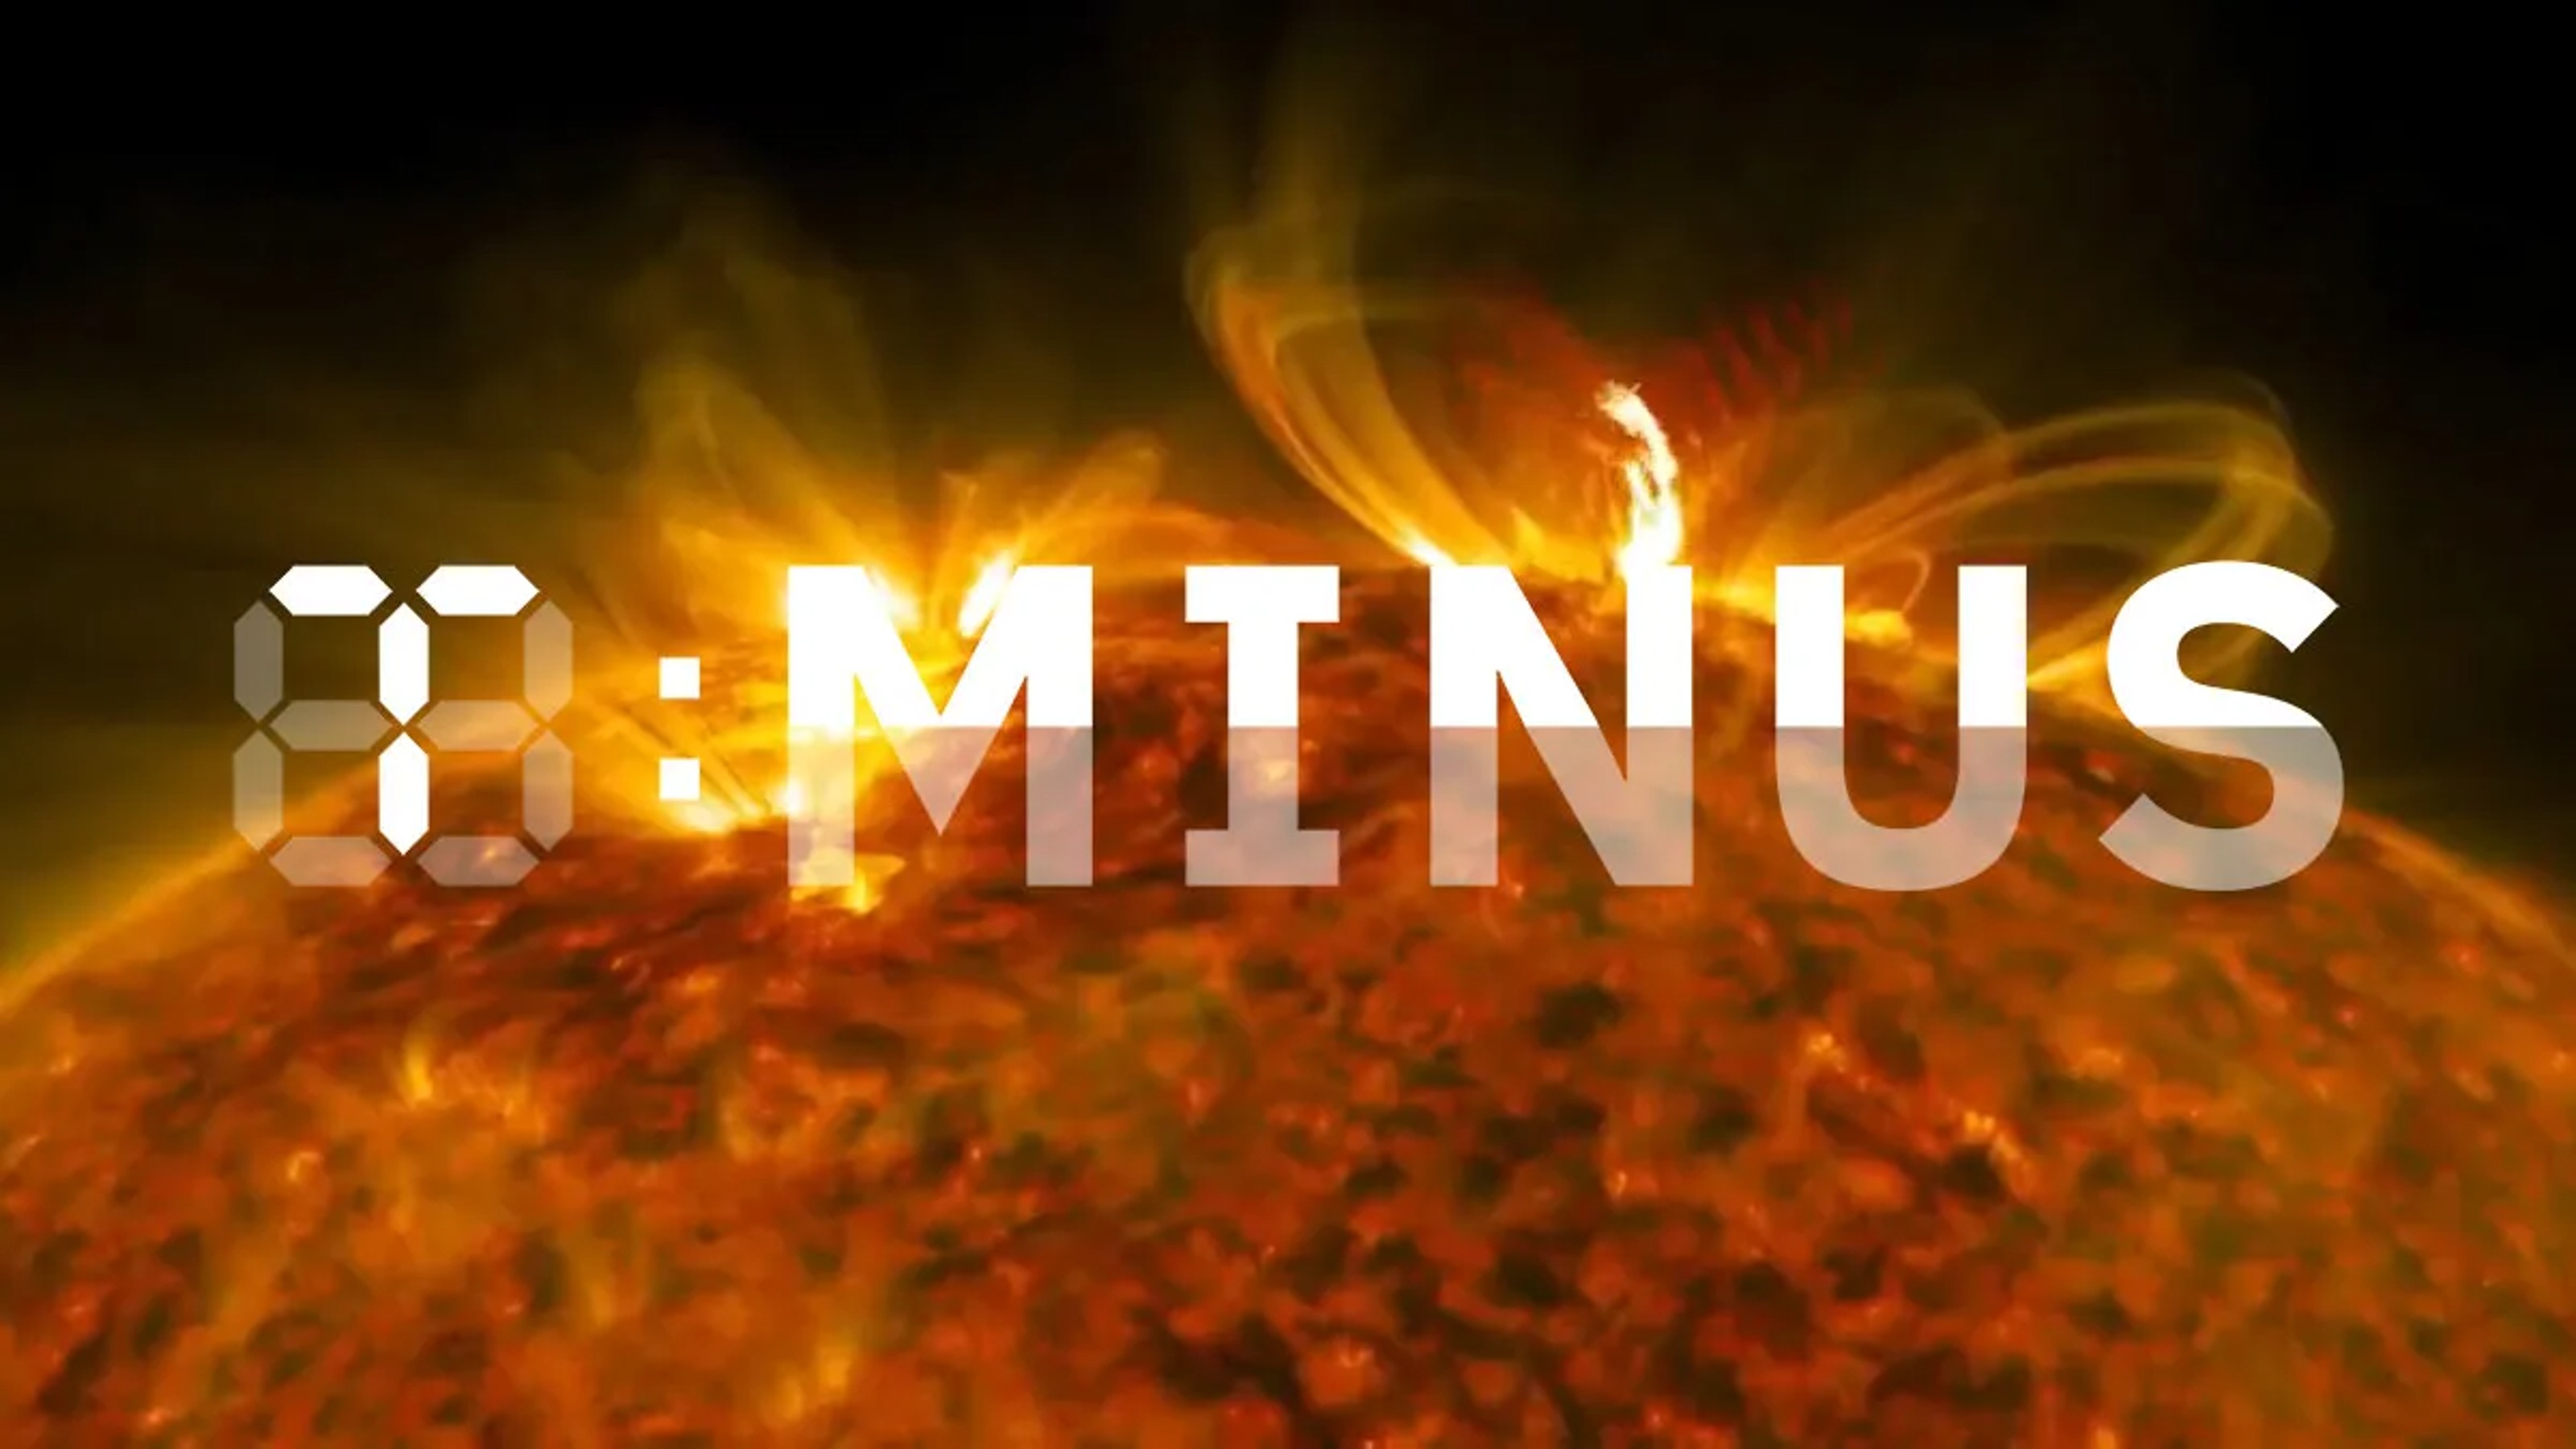 A solar image with digital counter displaying "0:MINUS" overlaid against the background of the sun with solar flares.